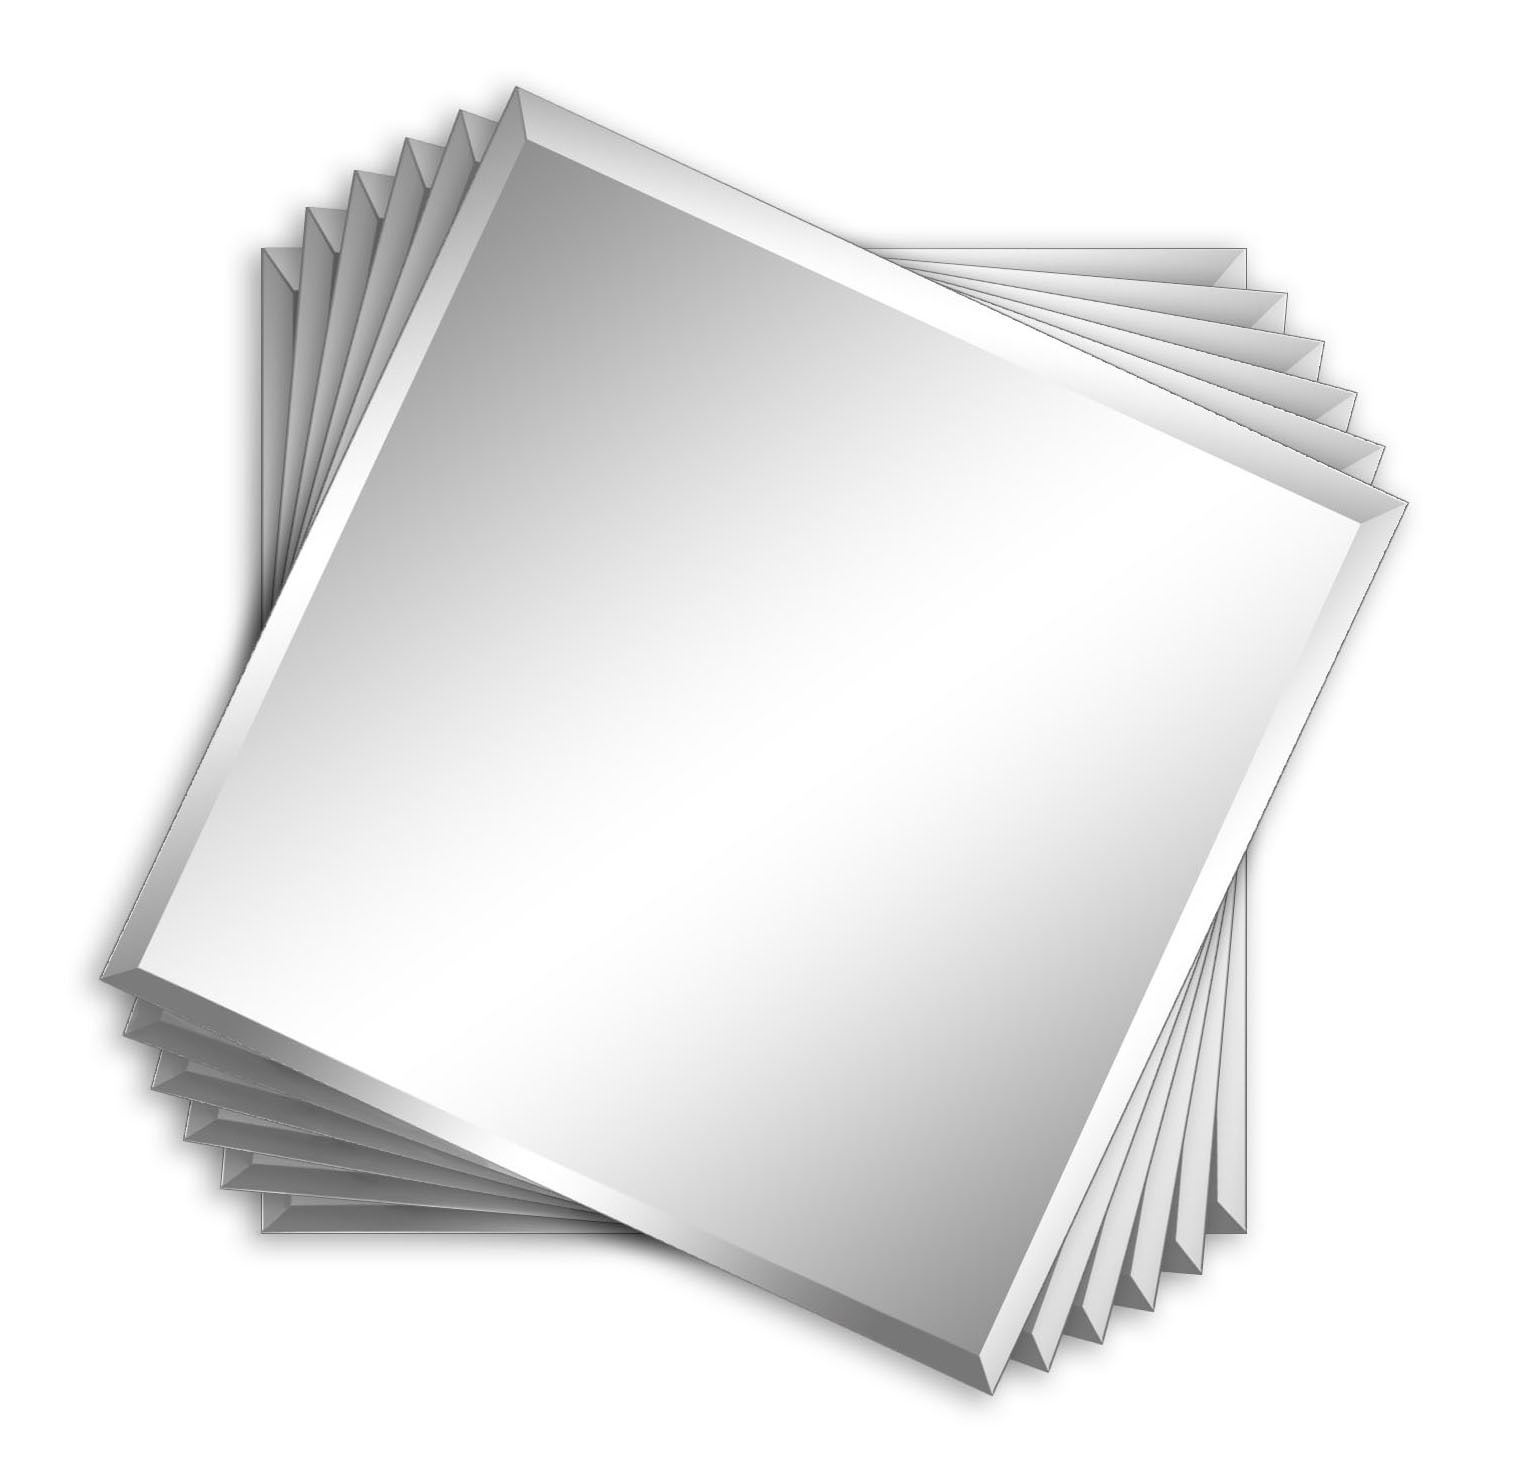 Square Beveled Wall Mirror, Beveled Mirror Tiles For Walls